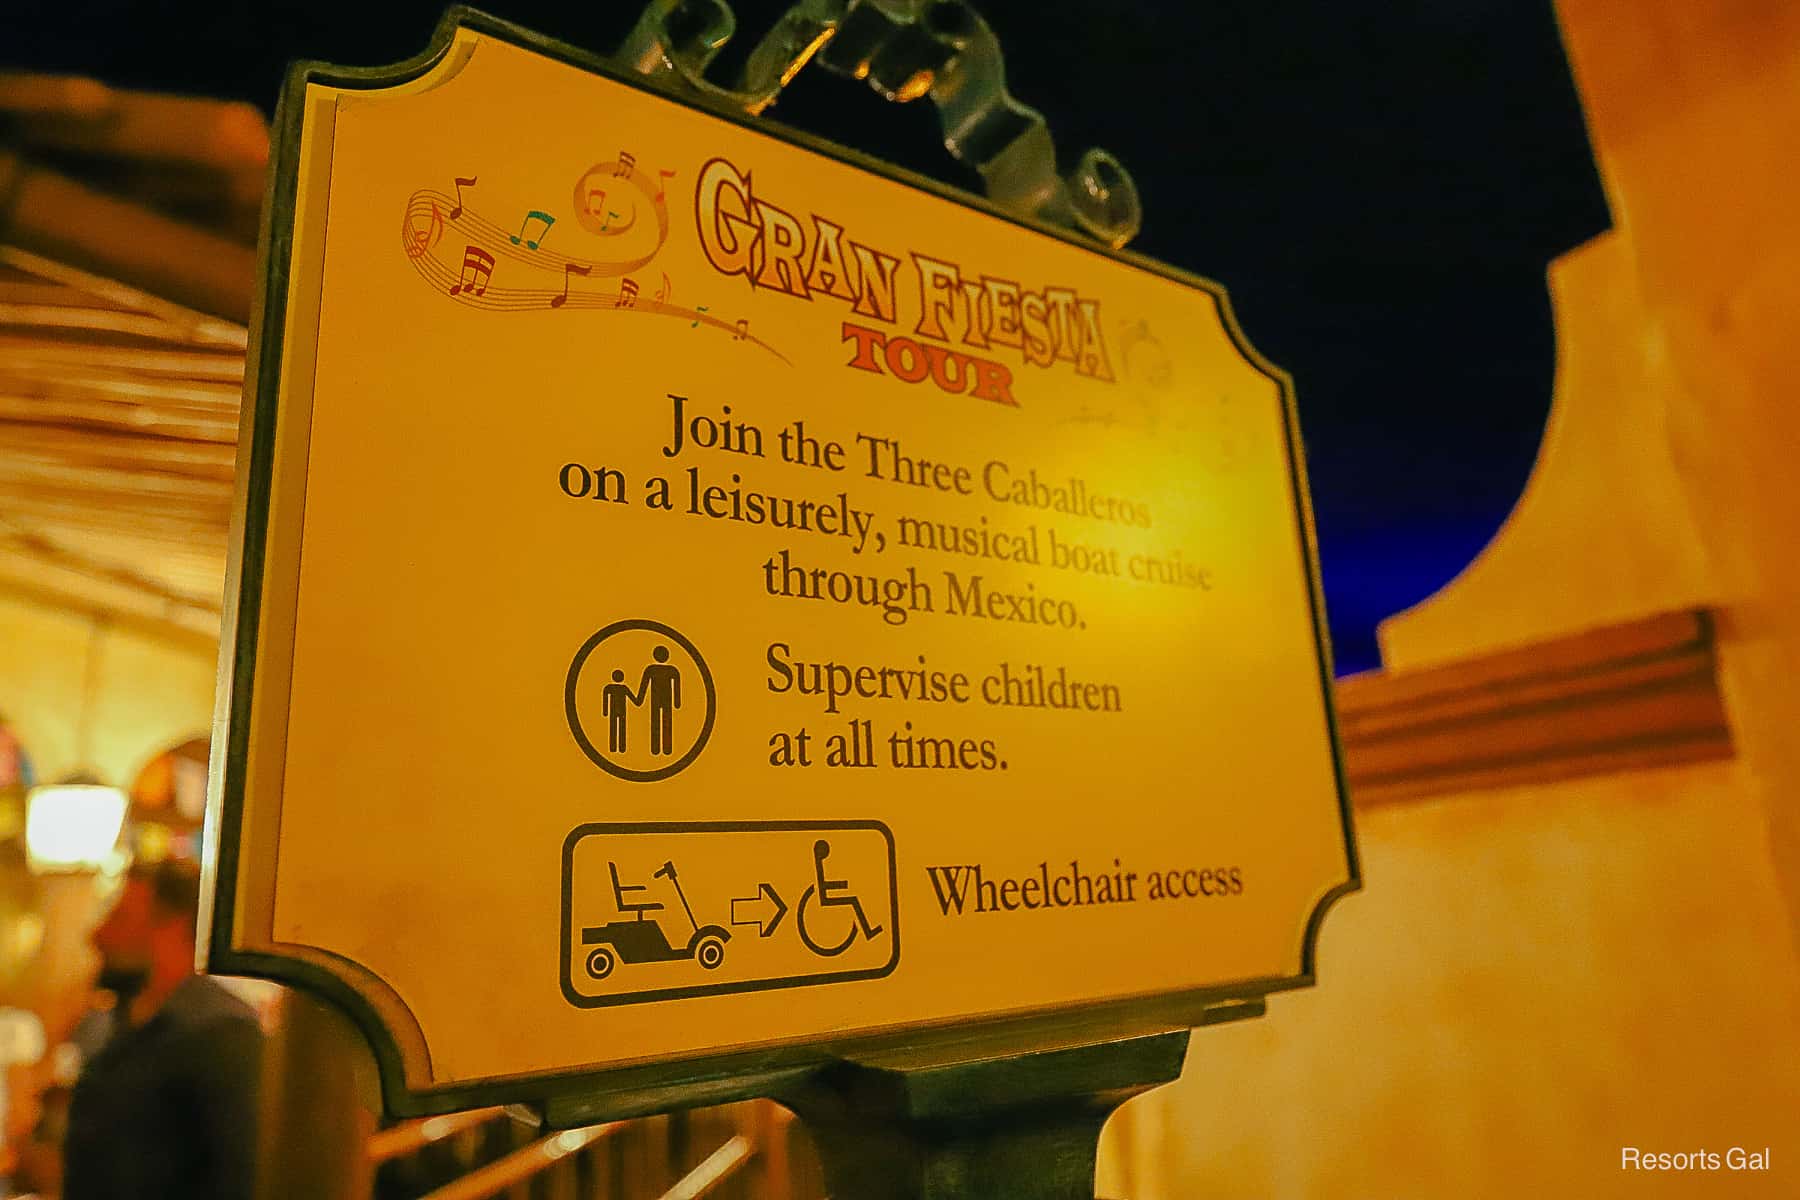 Ride Rules for the Gran Fiesta Tour 